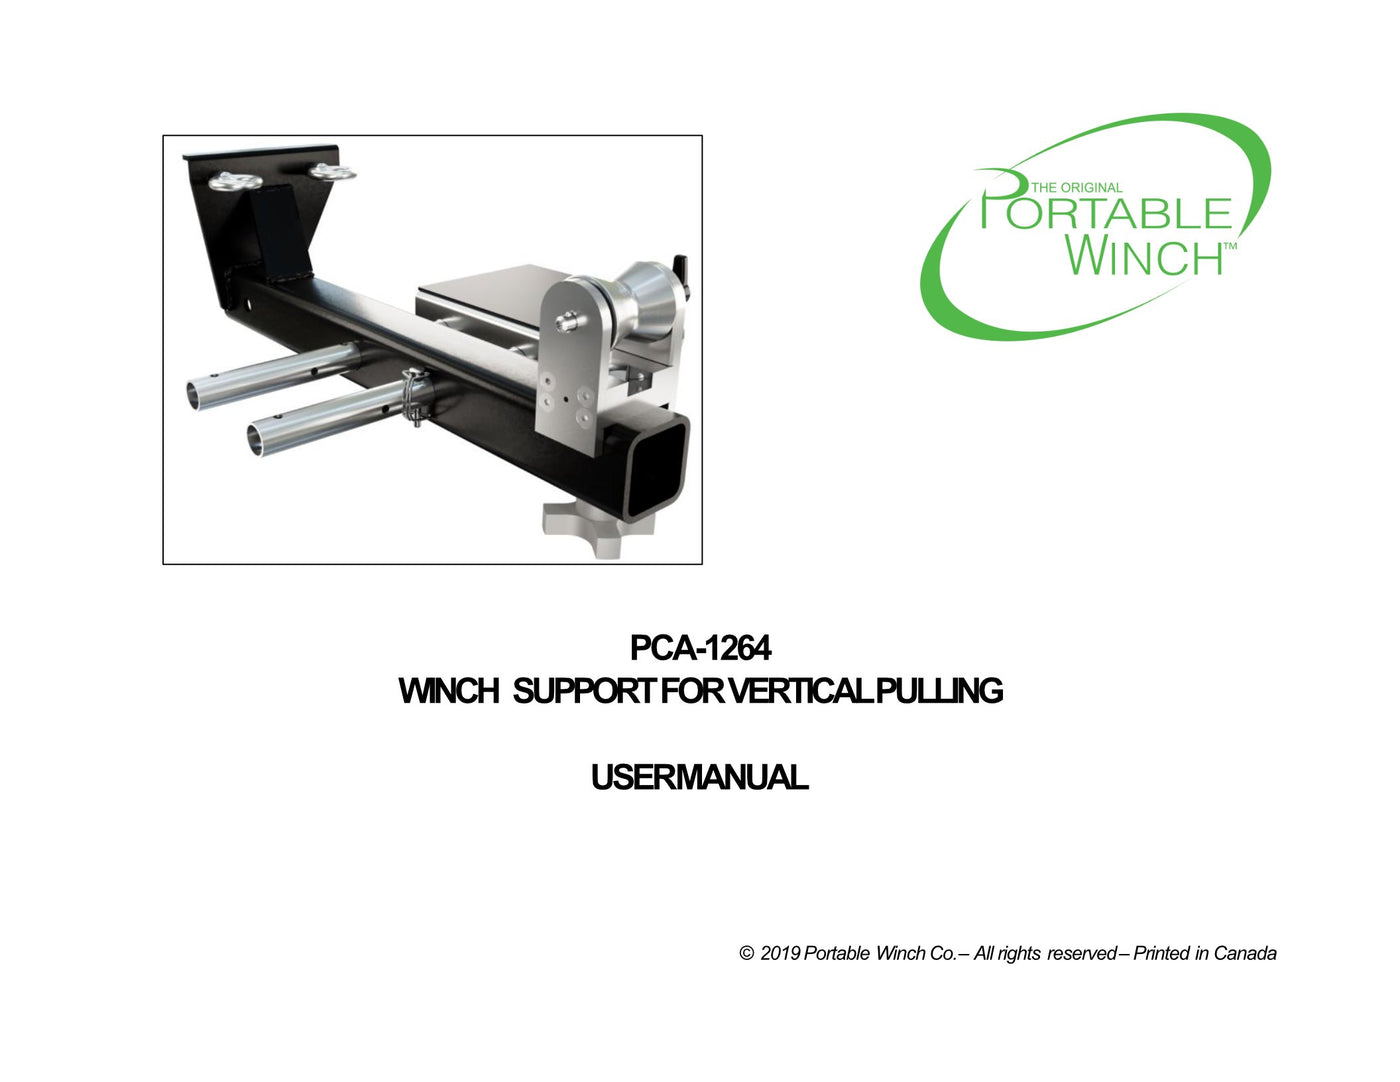 PCA-1264 Vertical pull winch support